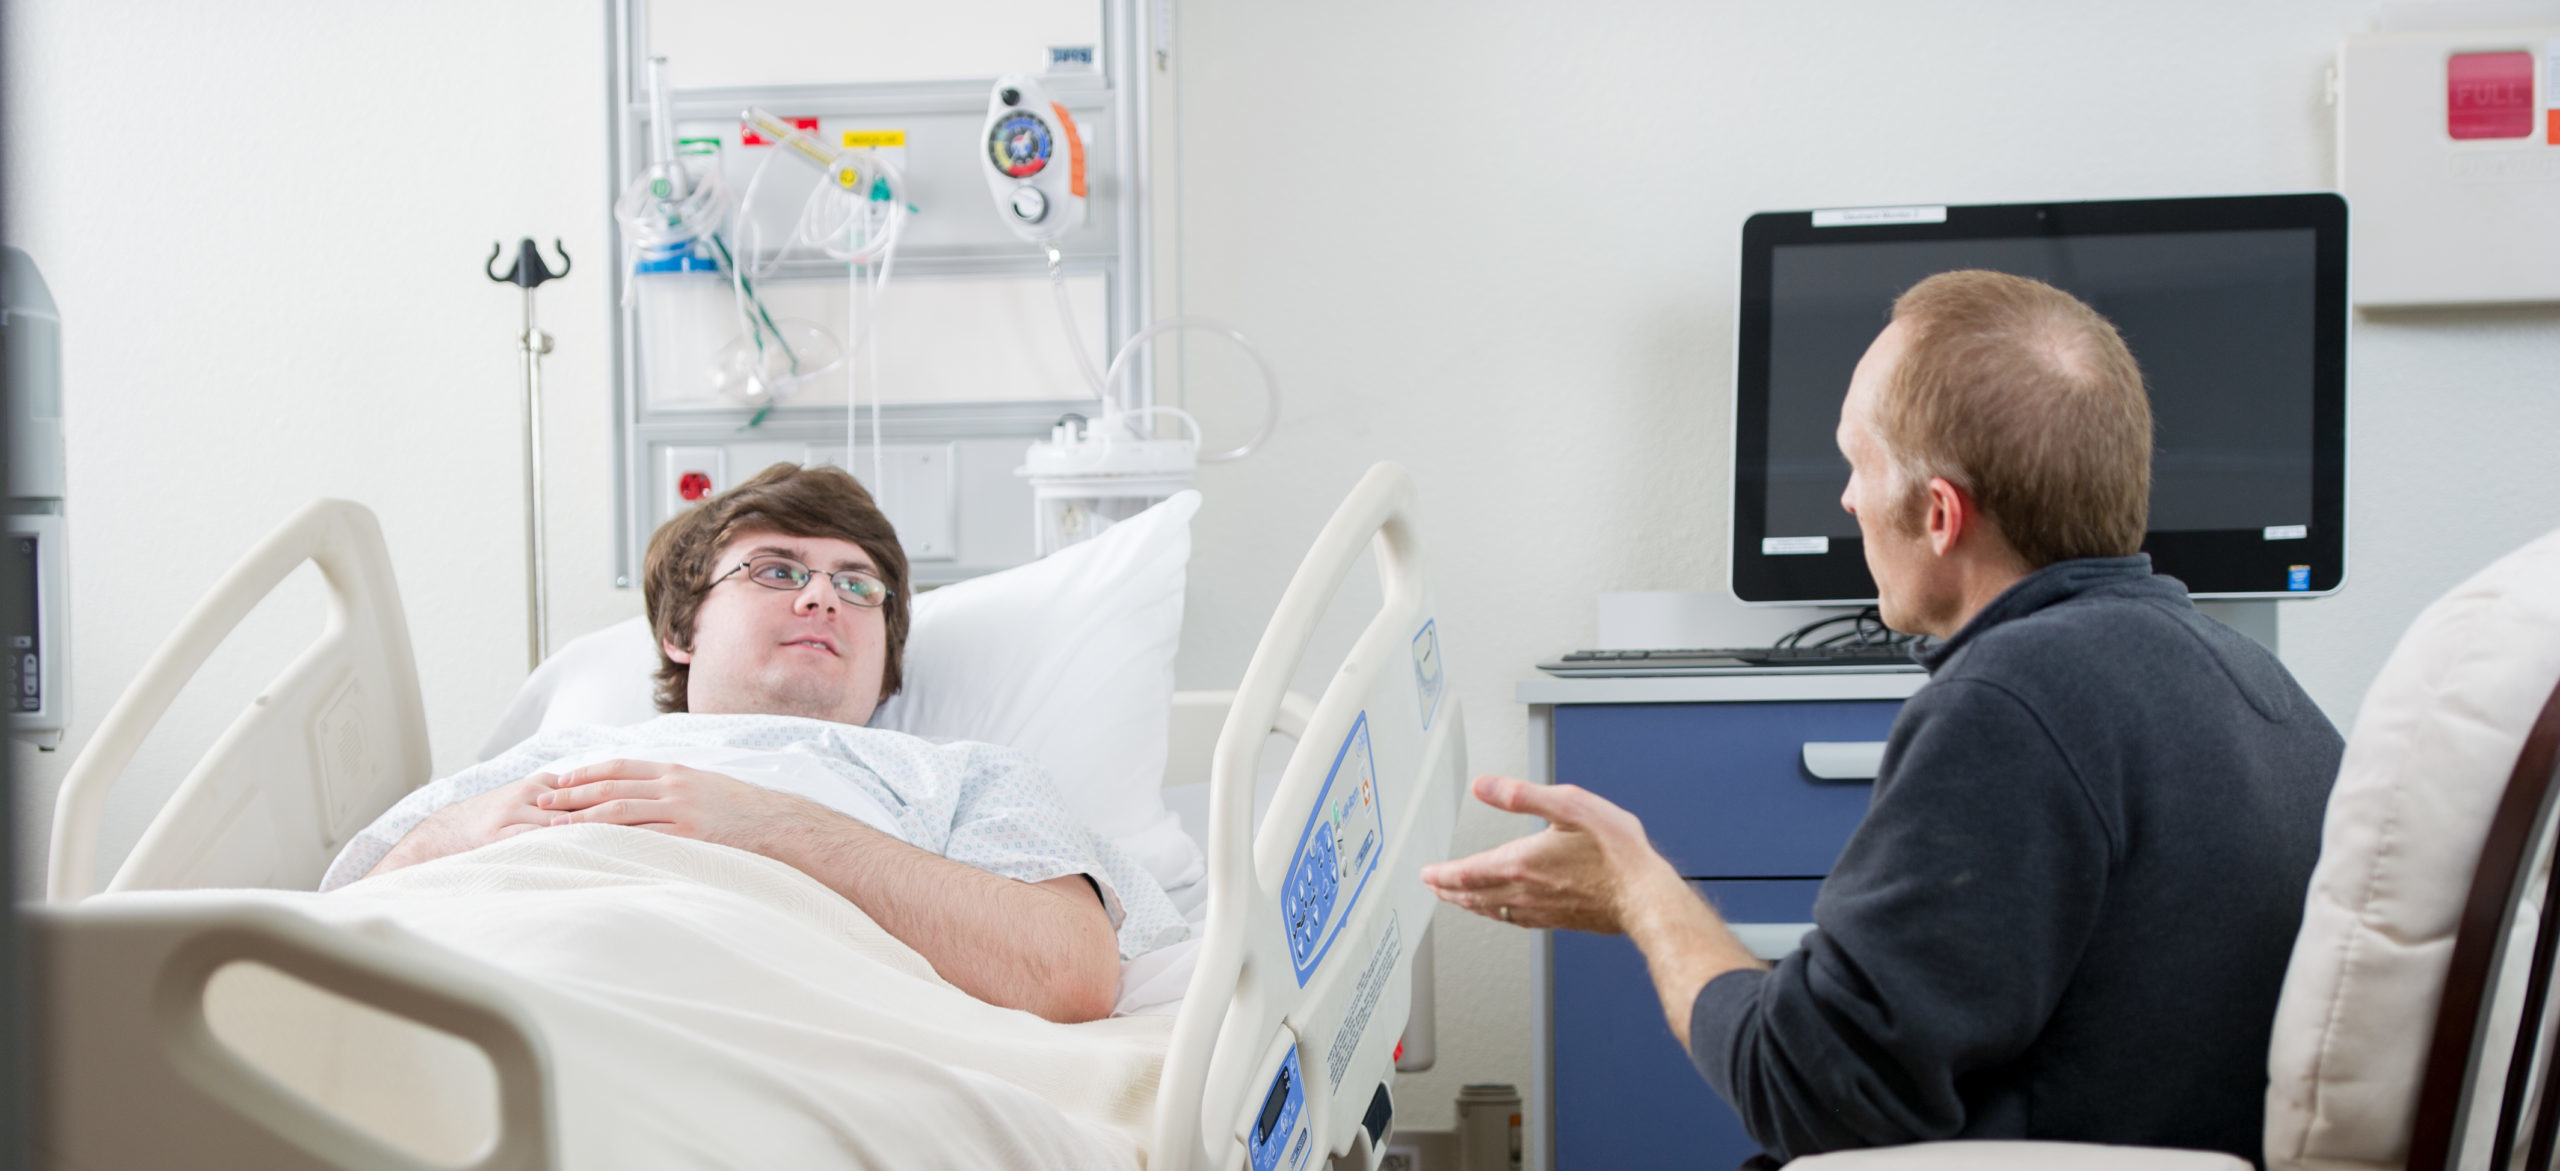 Social worker talking to man in the hospital.